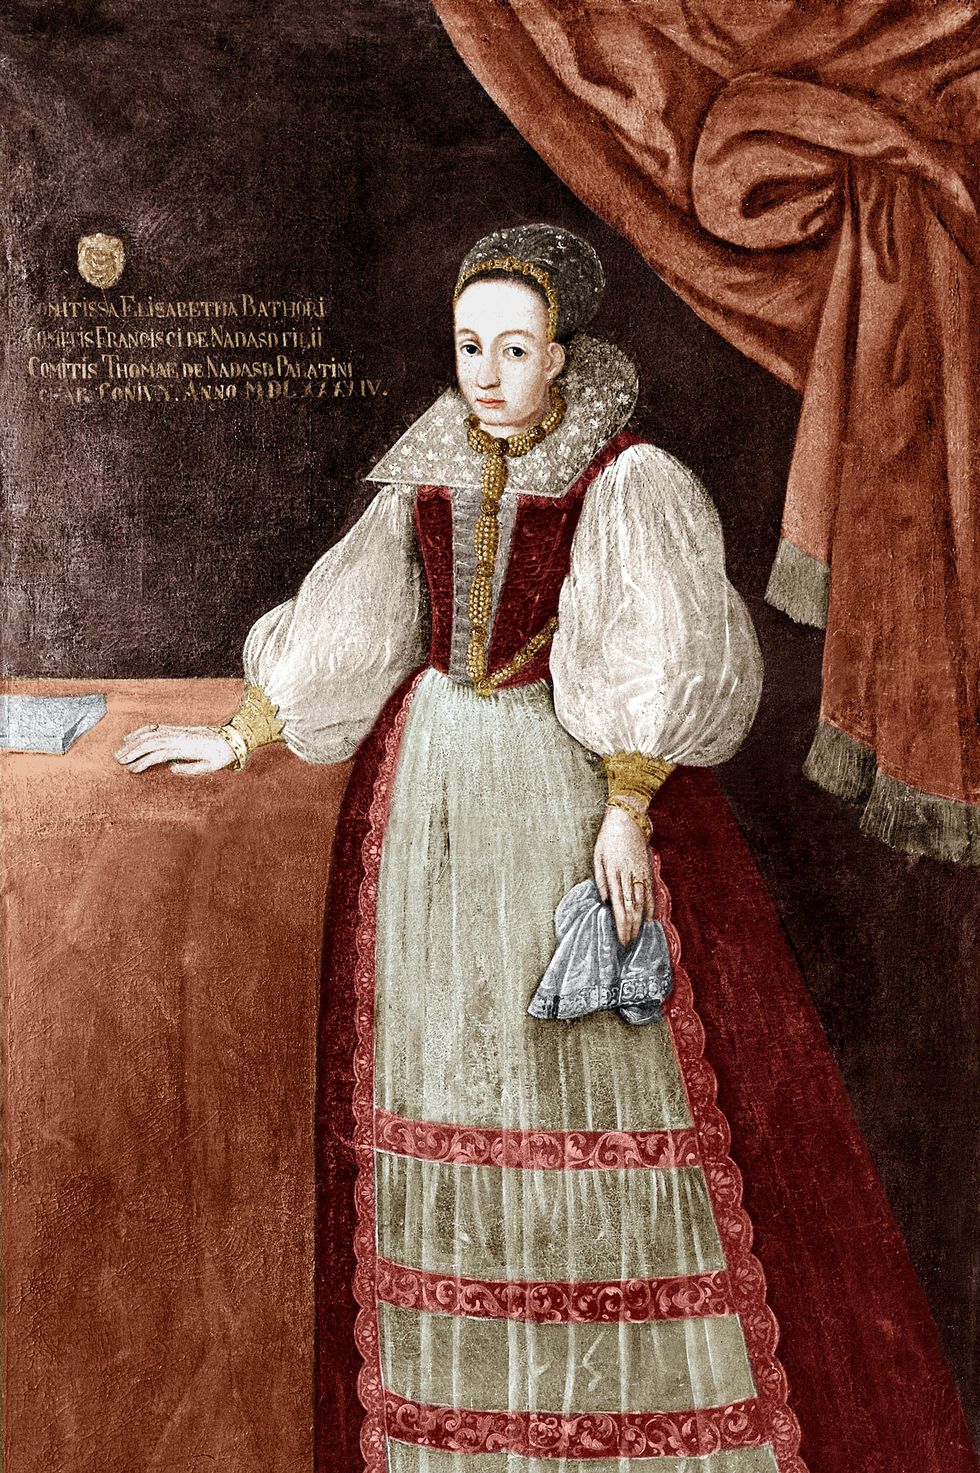 a painting depicting countess elizabeth bathory standing and holding a handkerchief